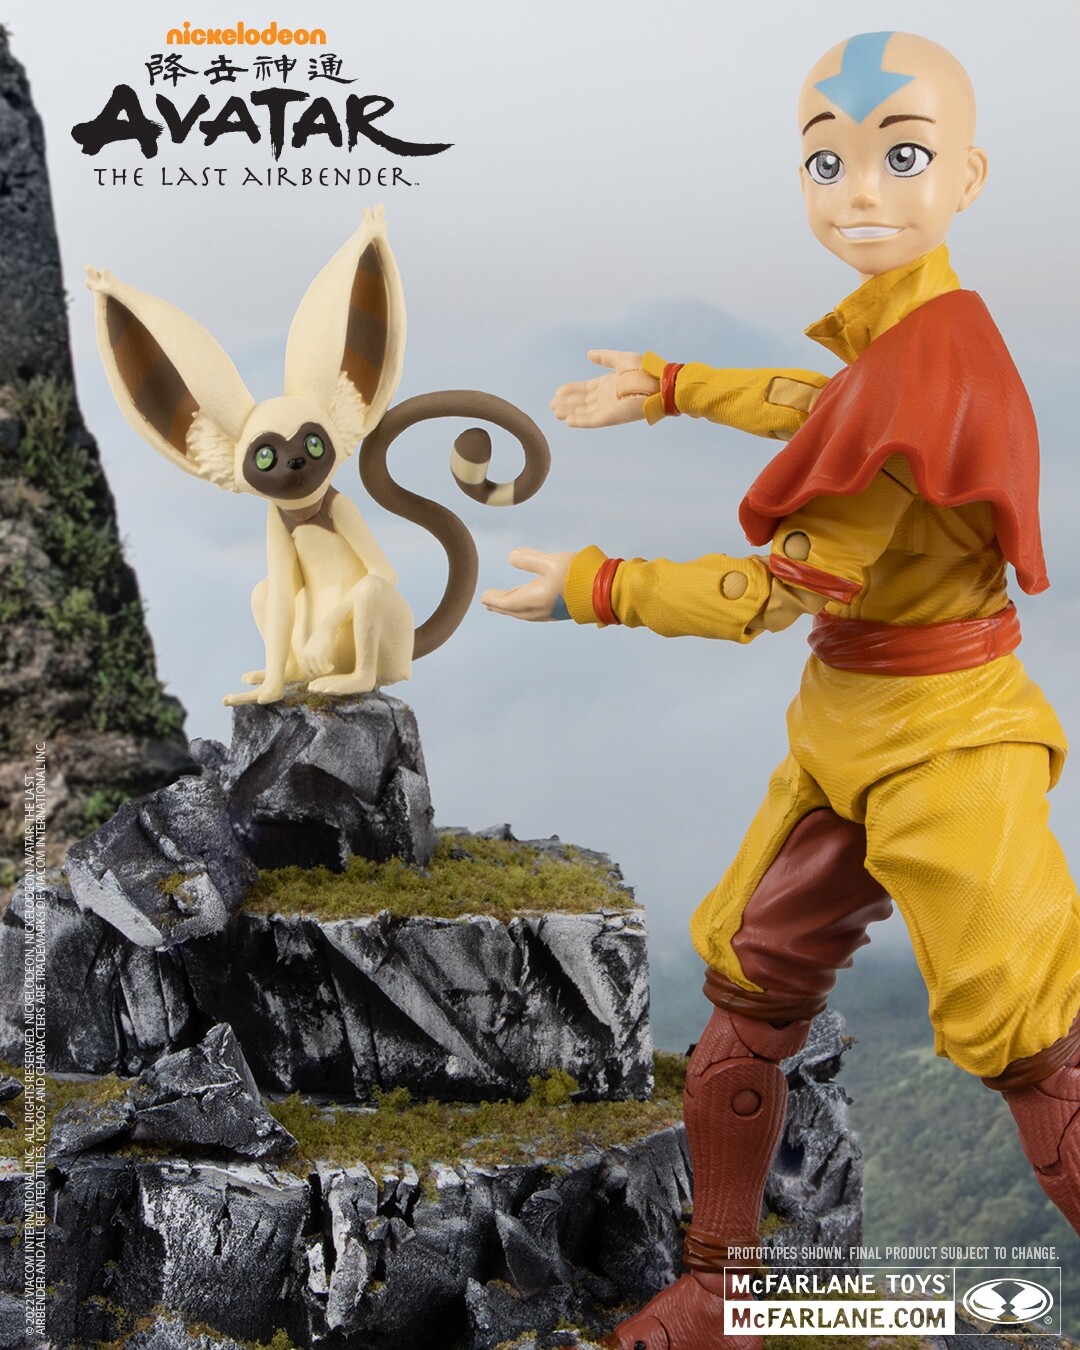 Avatar The Last Airbender - I helped with the sculpt for Momo